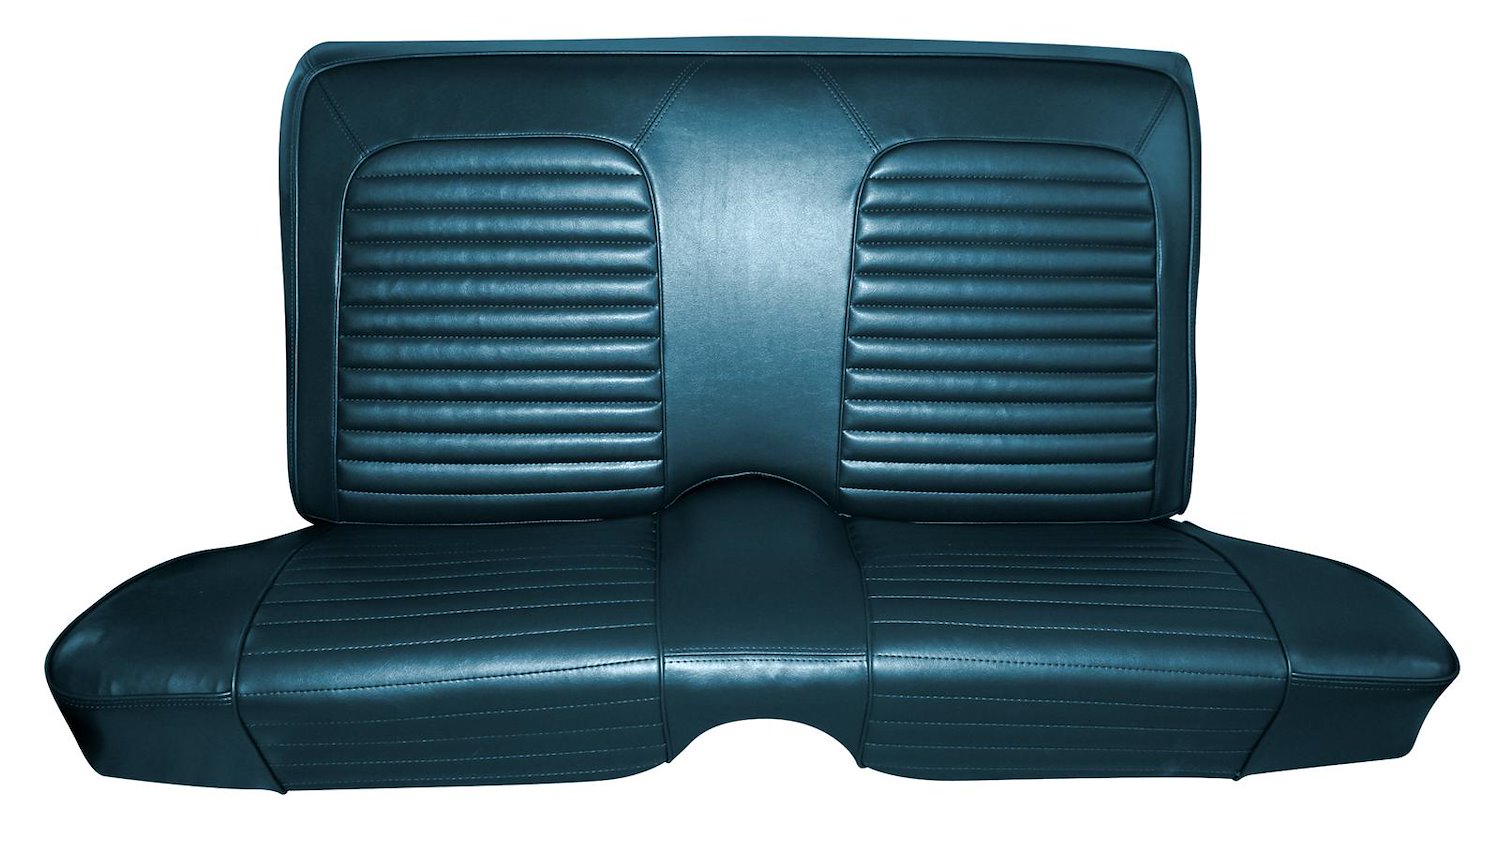 1967 Ford Mustang Standard Interior Front Bench Seat Upholstery Set